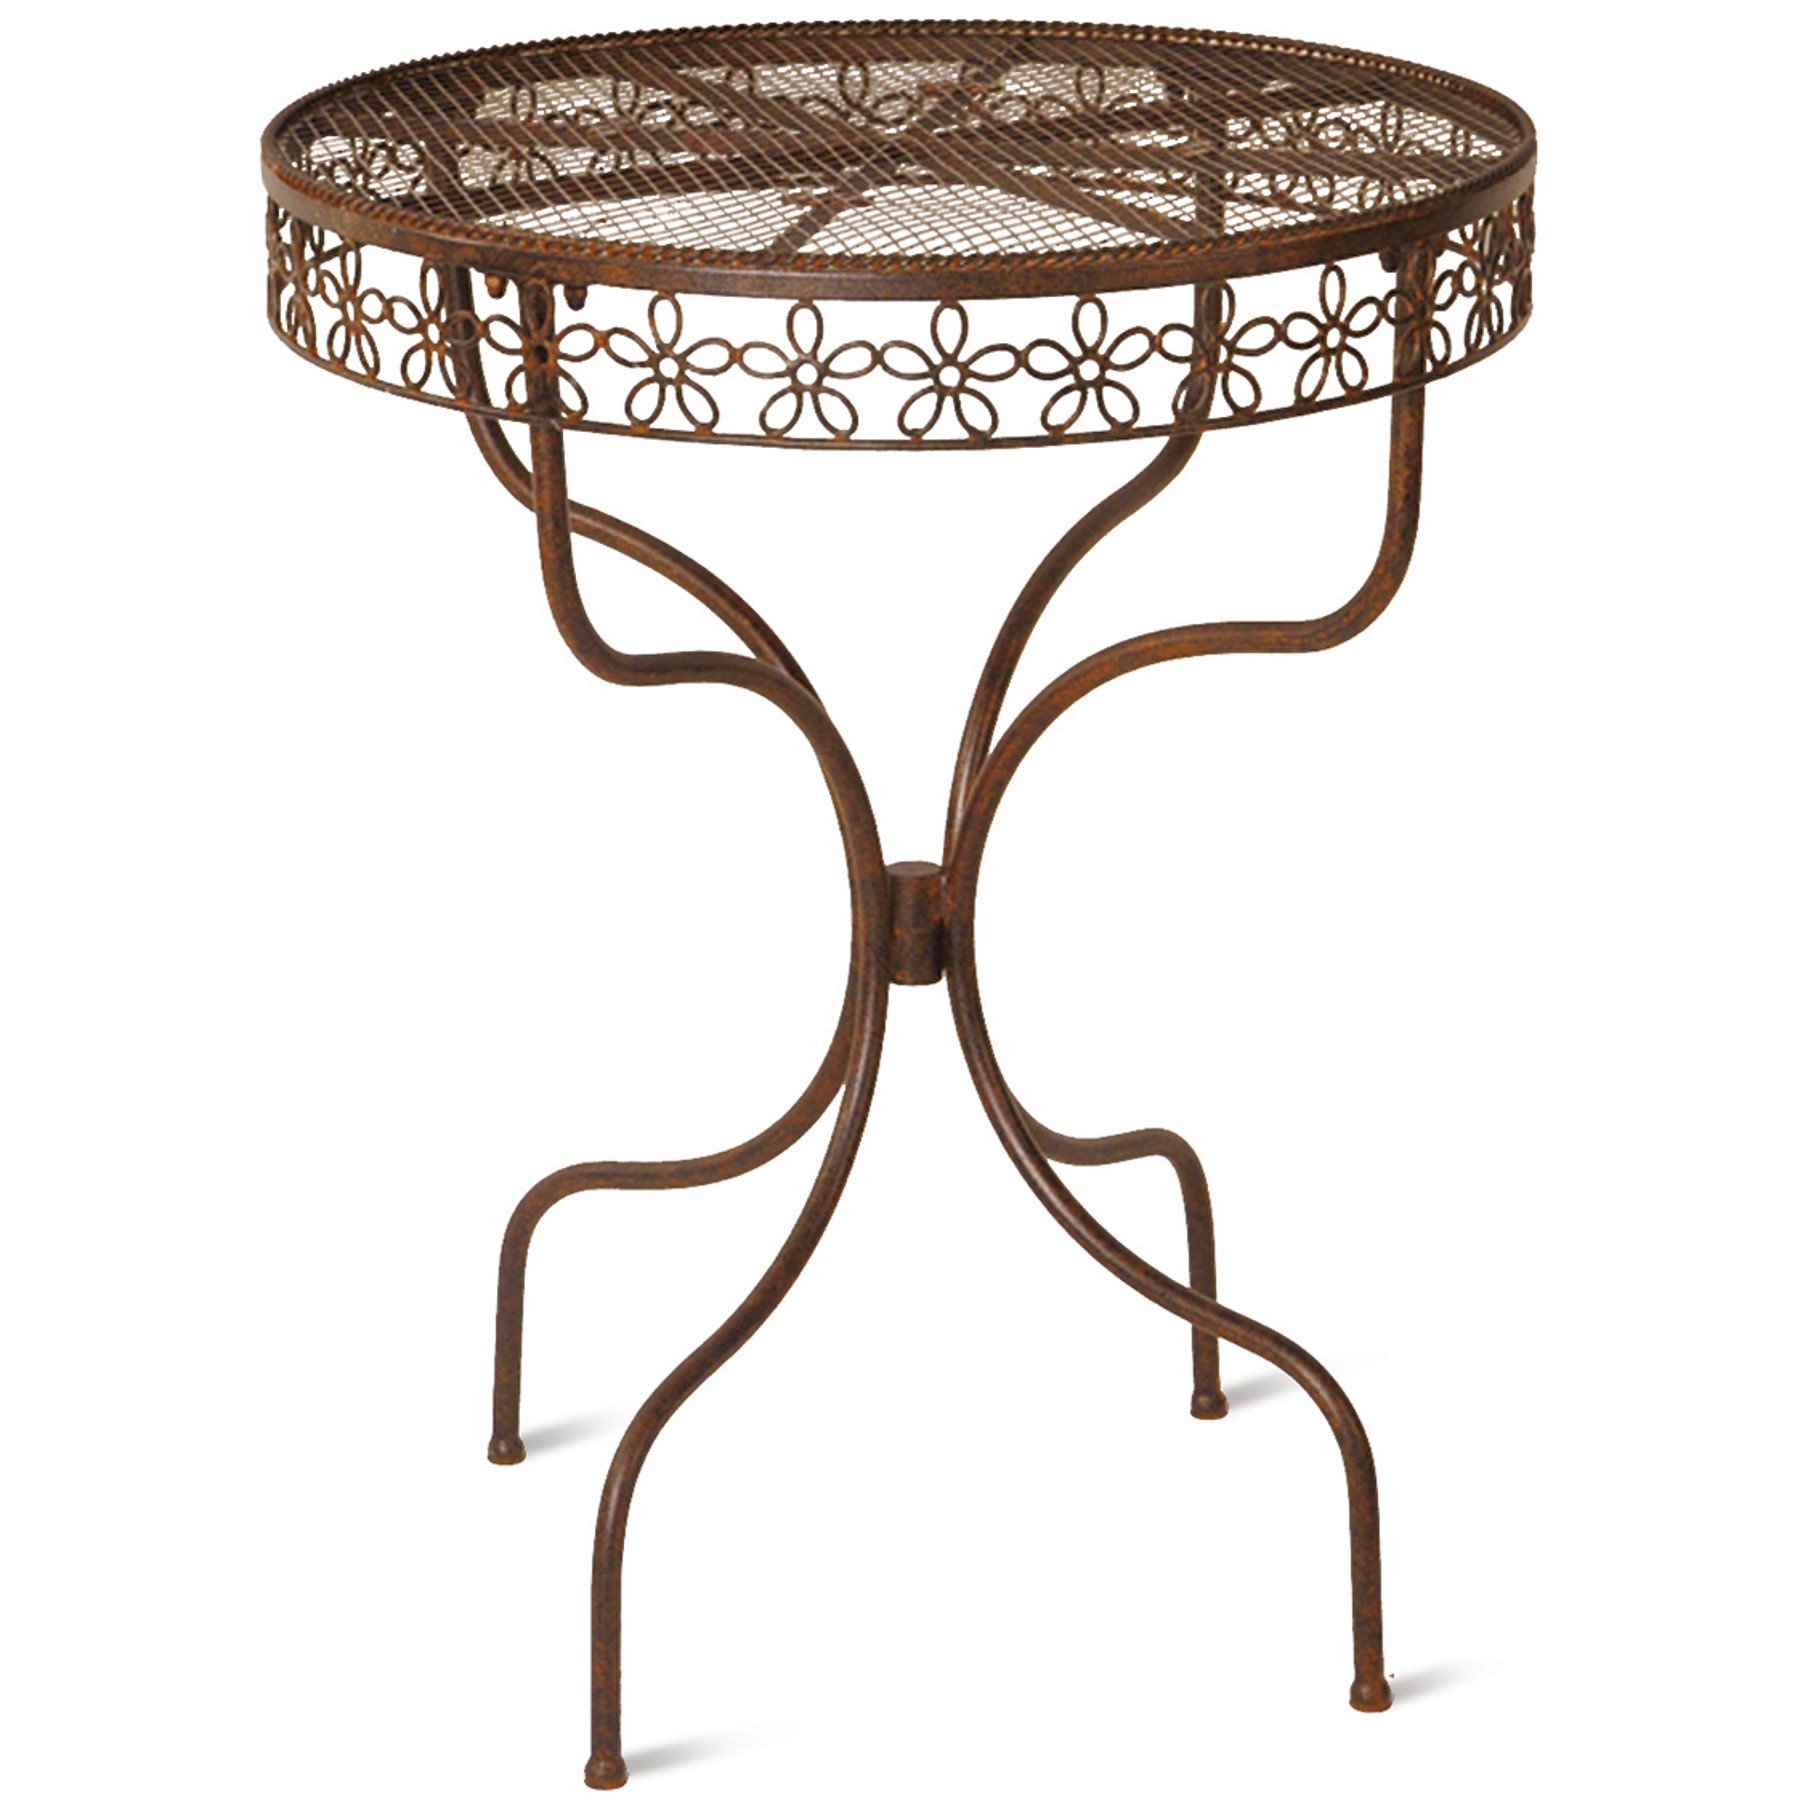 Deer Park Ironworks Daisy Ribbon Plant Stand